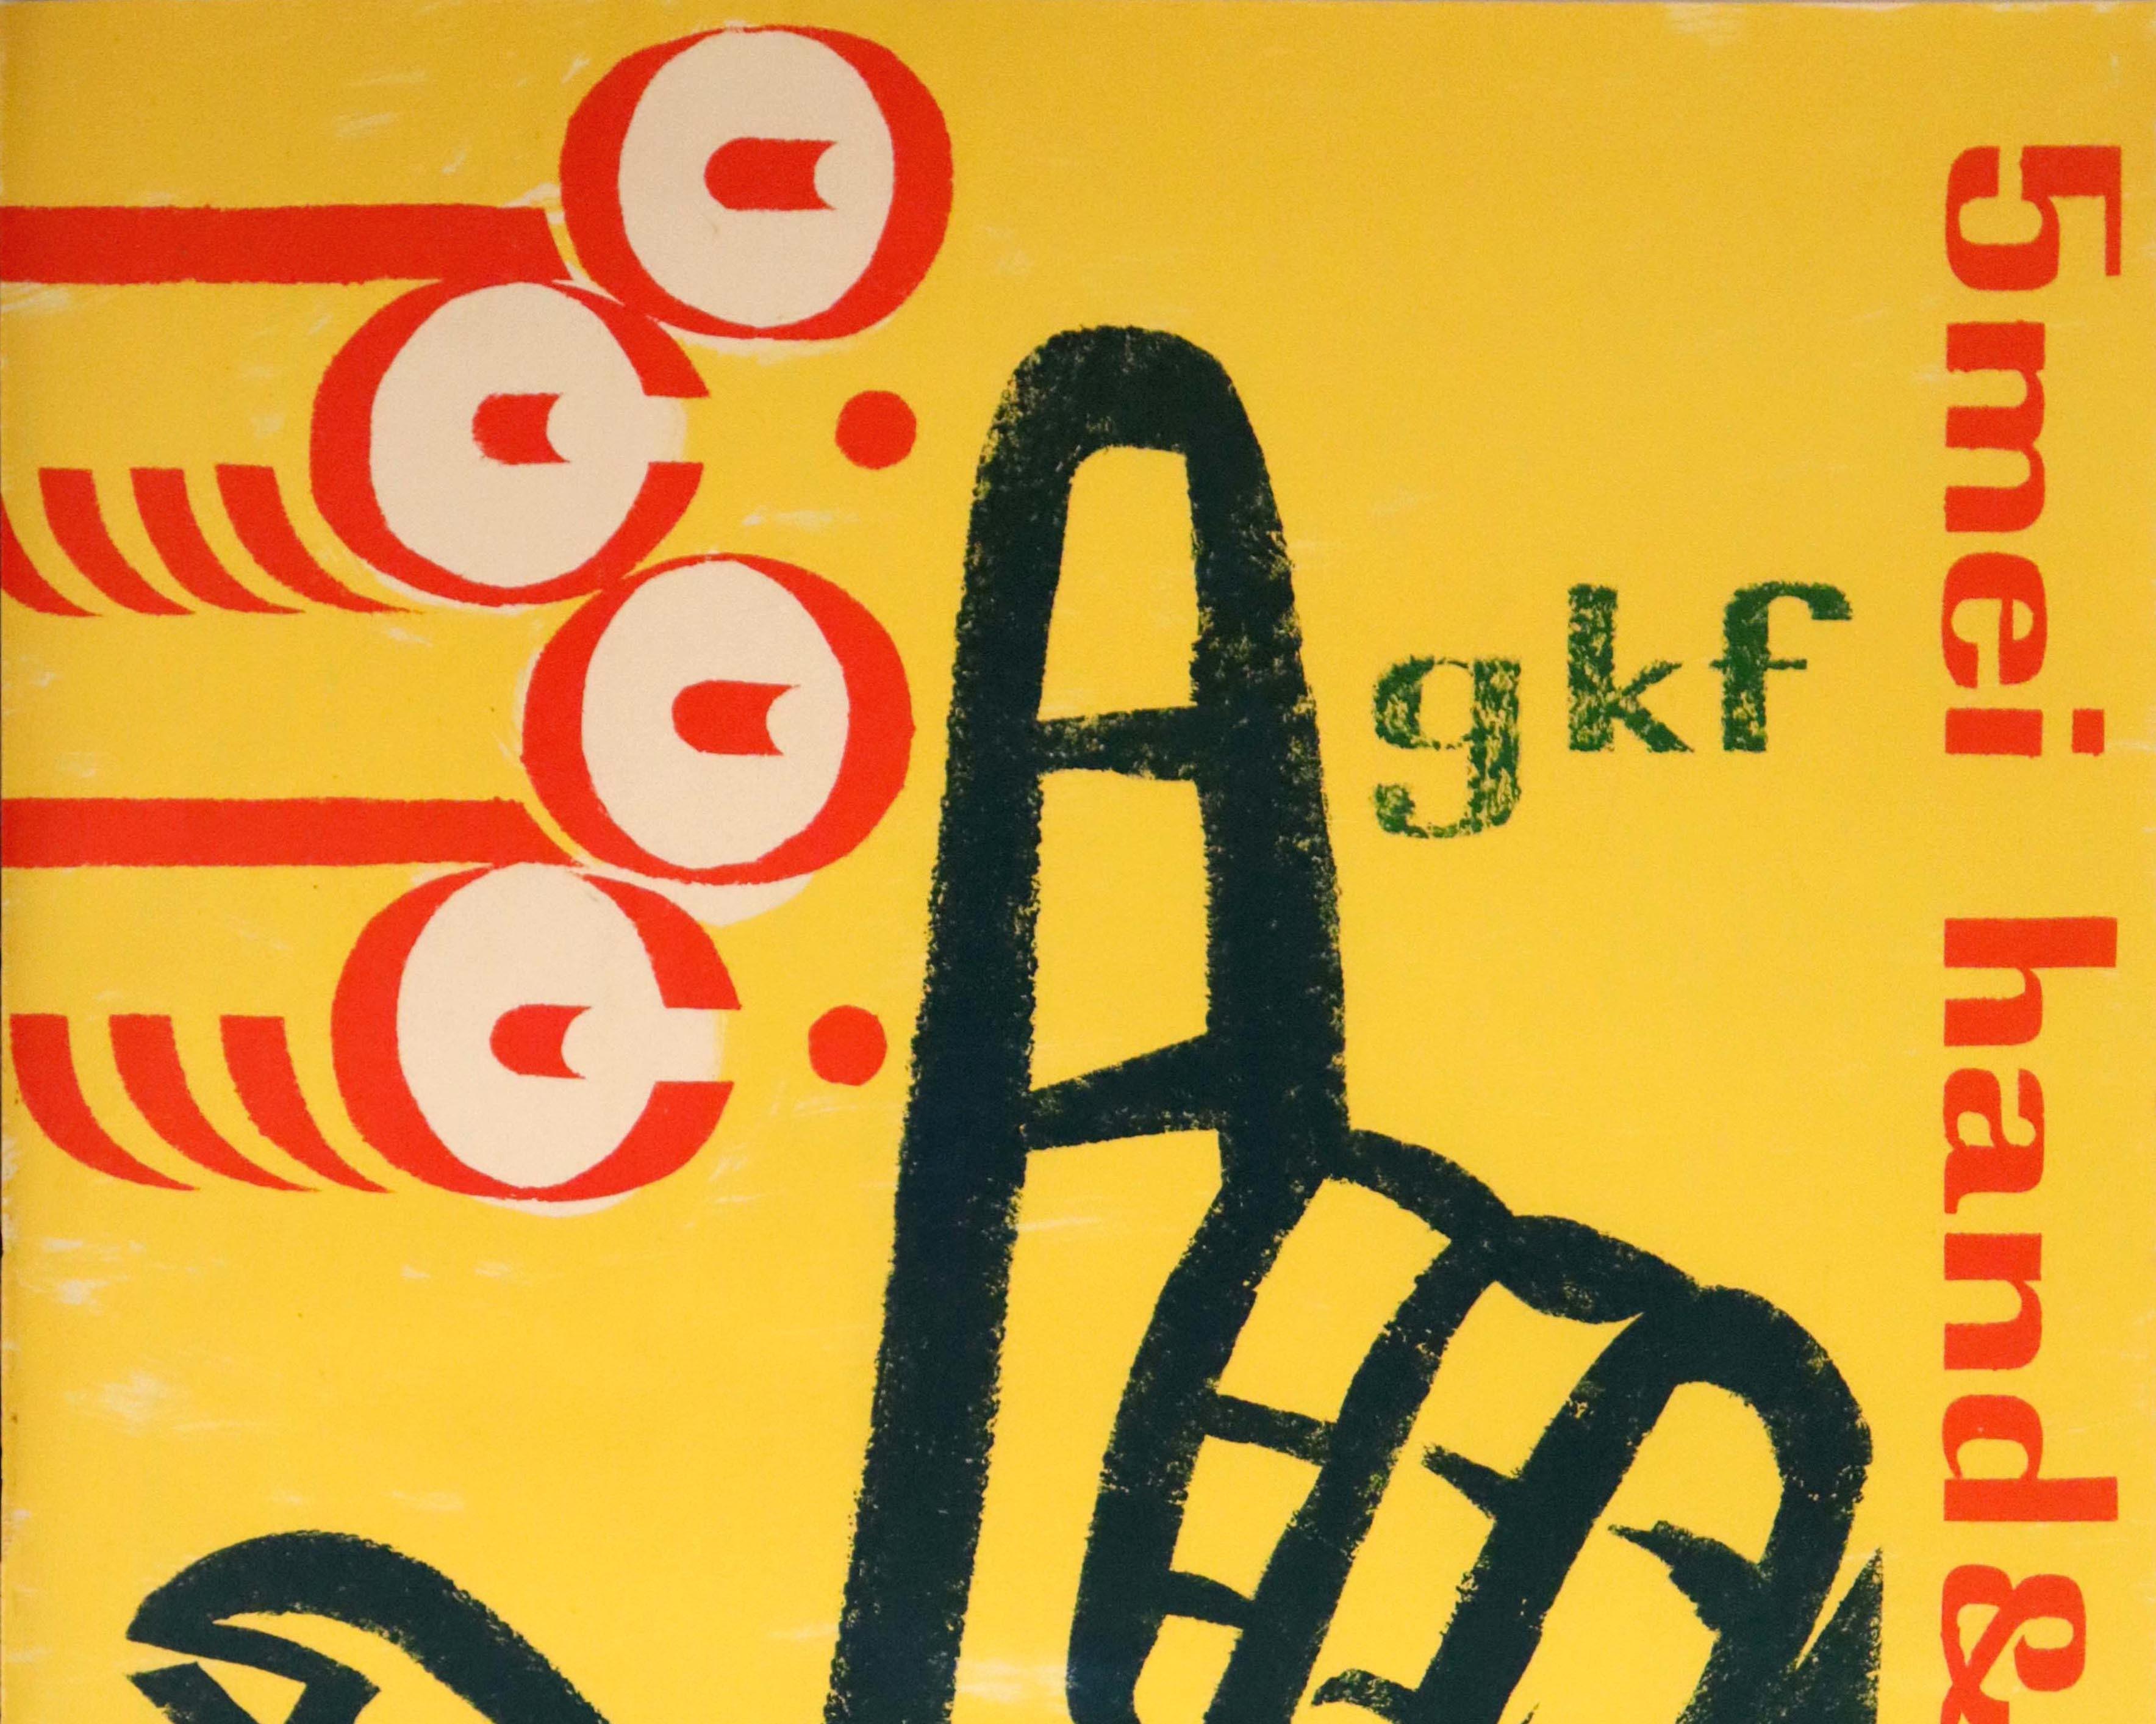 Original vintage advertising poster for the GKF 5 Mei Hand & Machine exhibition at the Stedelijk Museum in Amsterdam featuring a mid-century illustration of a hand in black with a finger pointing up next to red and white shapes against the yellow